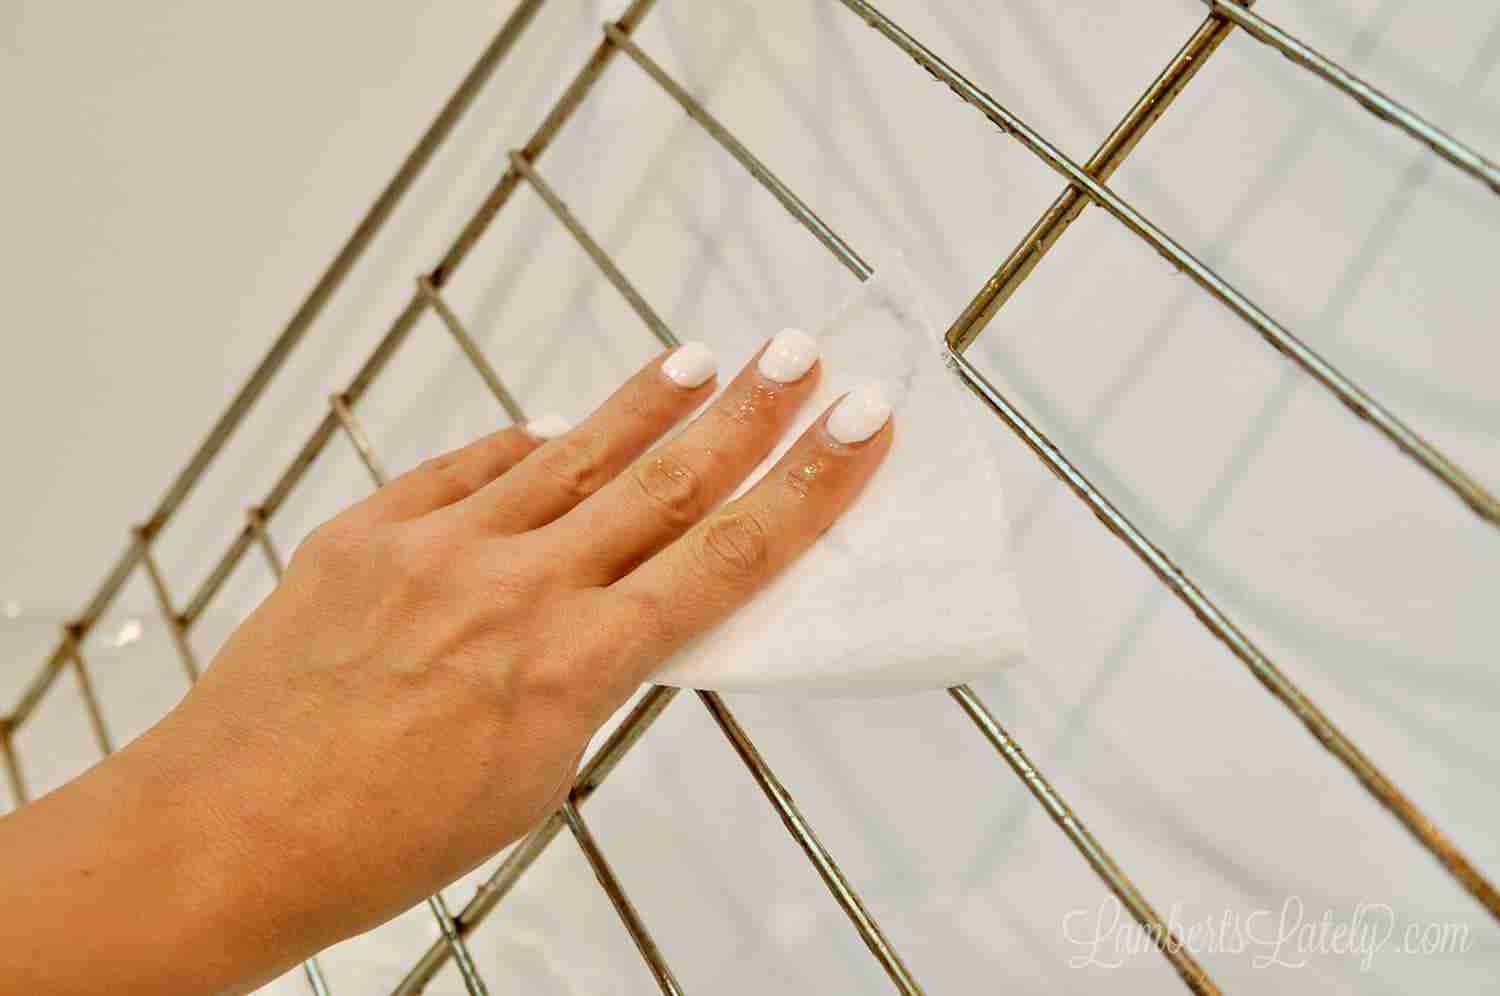 scrubbing an oven rack with a dryer sheet